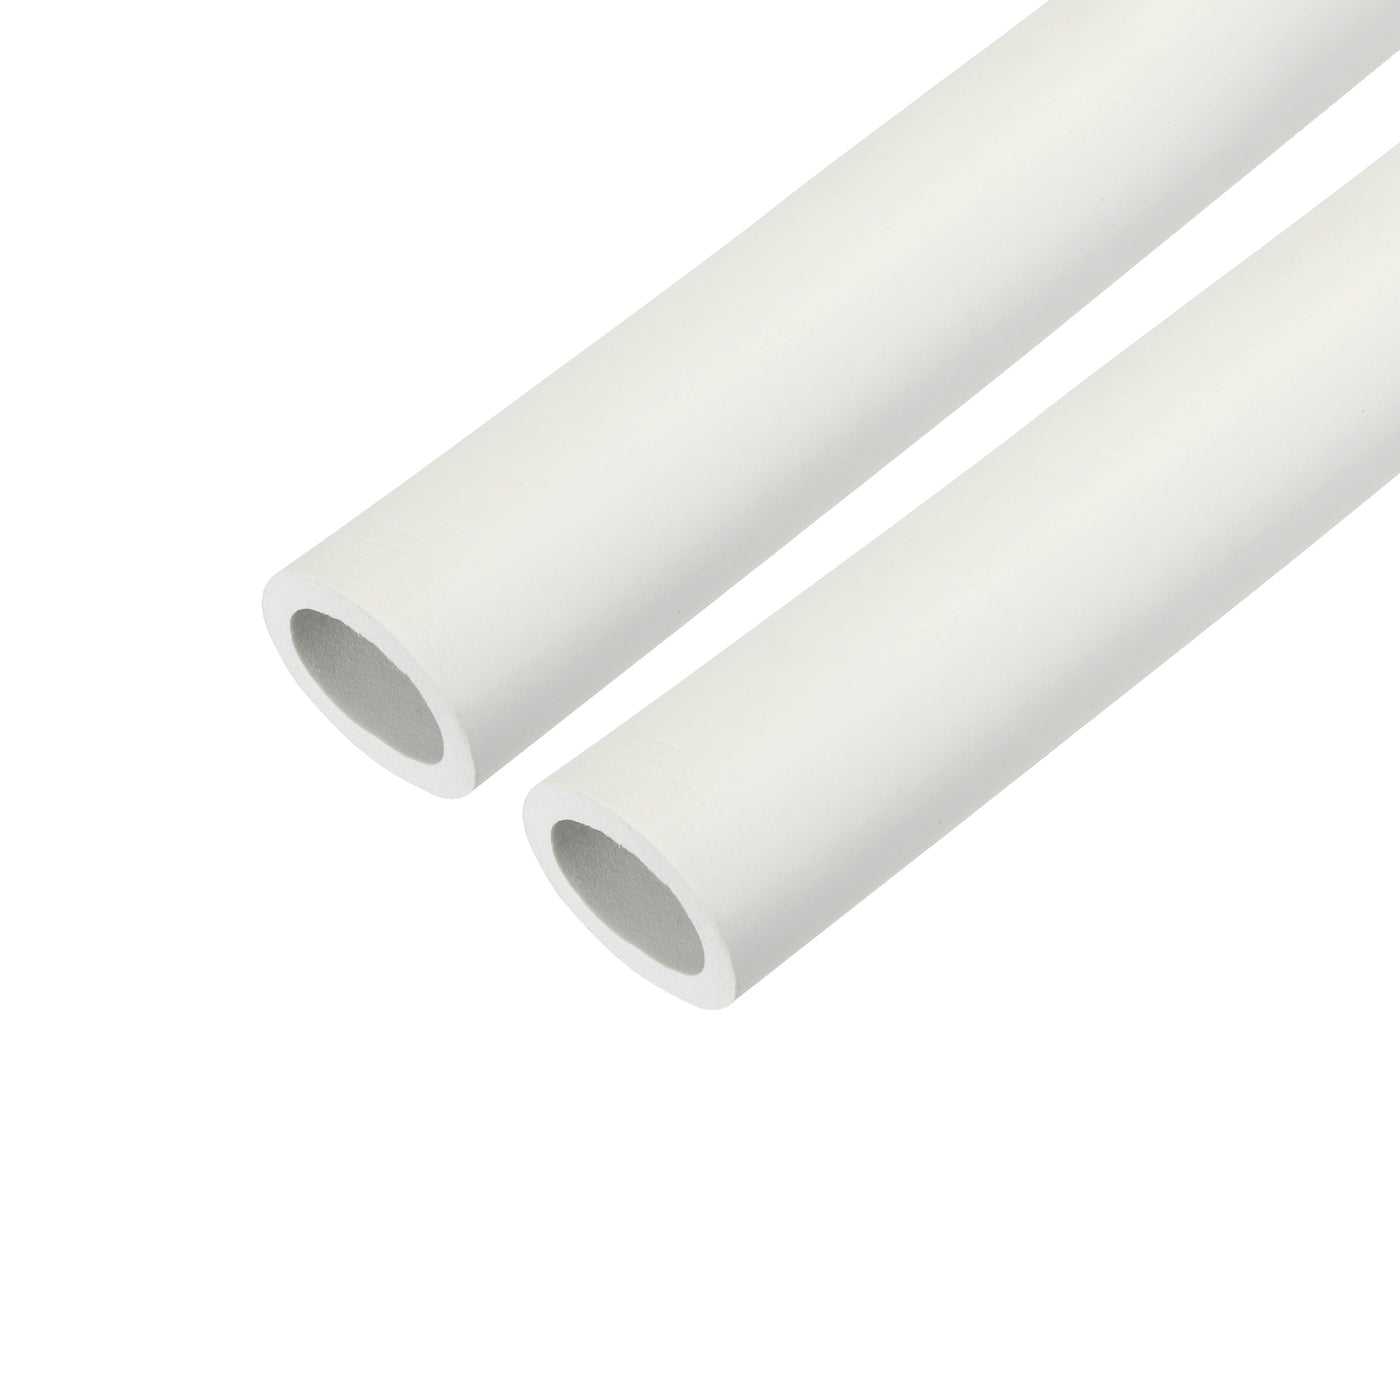 uxcell Uxcell 2pcs 3.3ft Pipe Insulation Tube 27mm ID 37mm OD Foam Tubing for Handle Grip Support, Beige